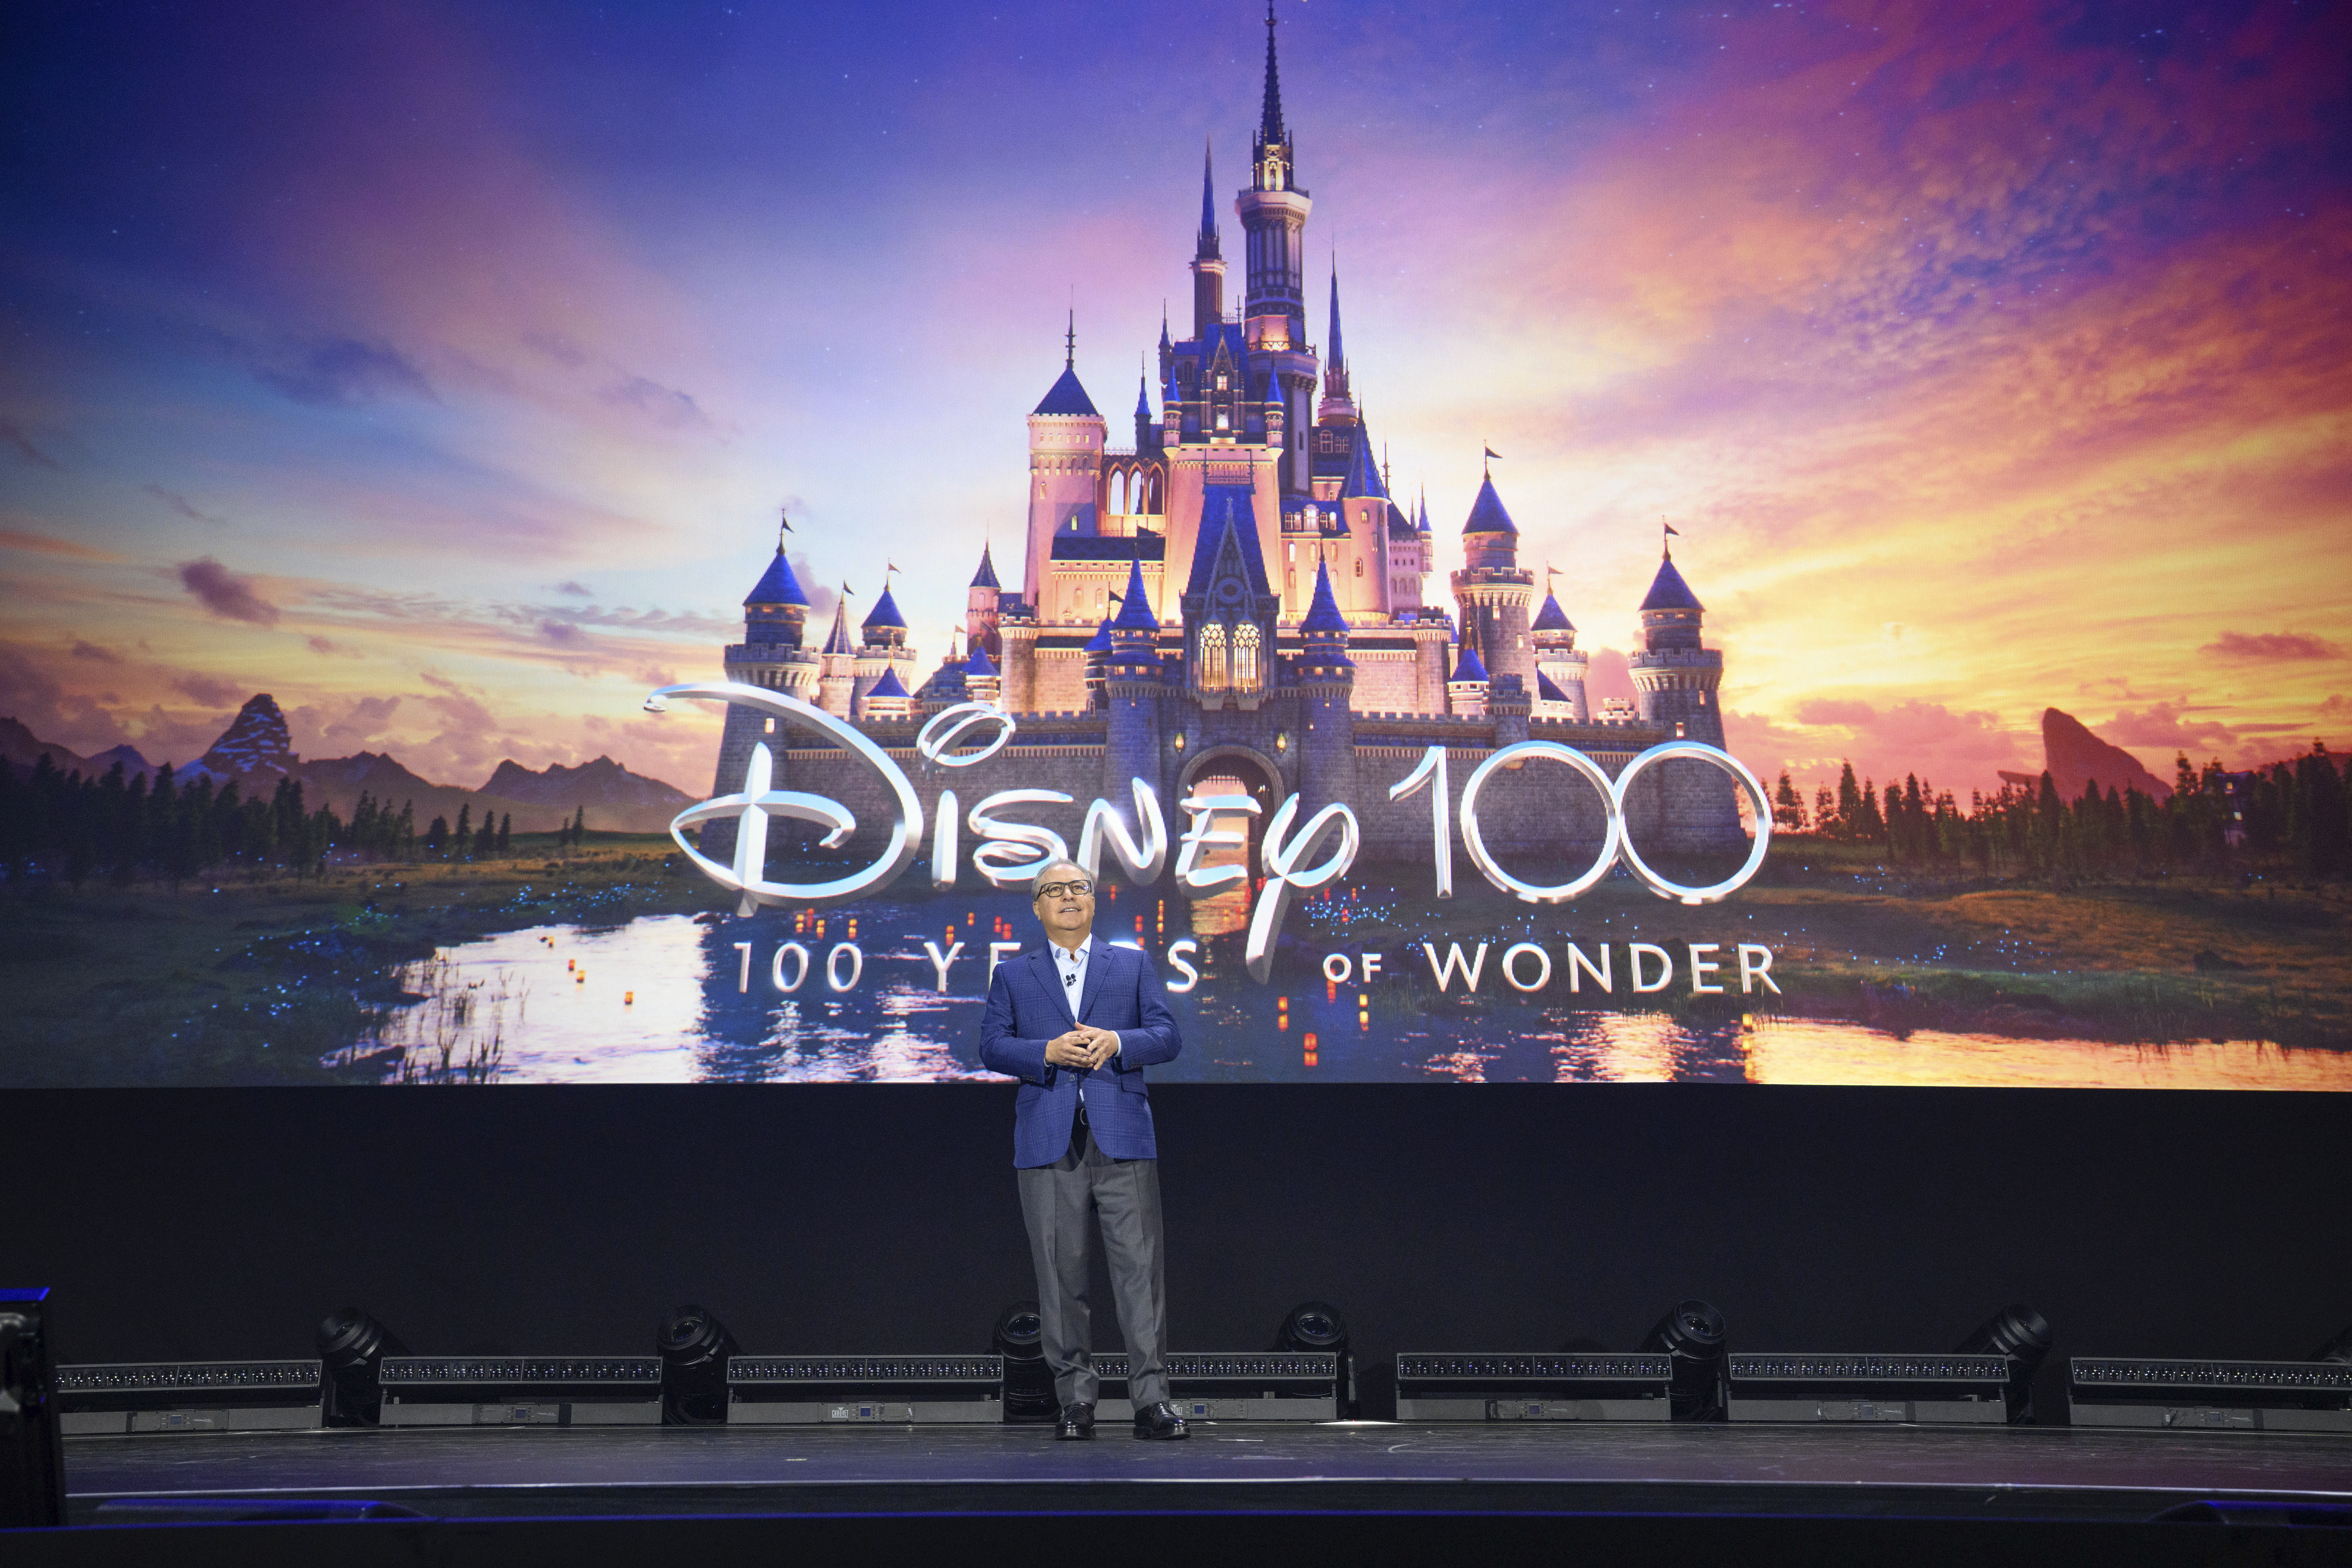 Disney and Pixar debut incredible slate of new films and series at D23 Expo